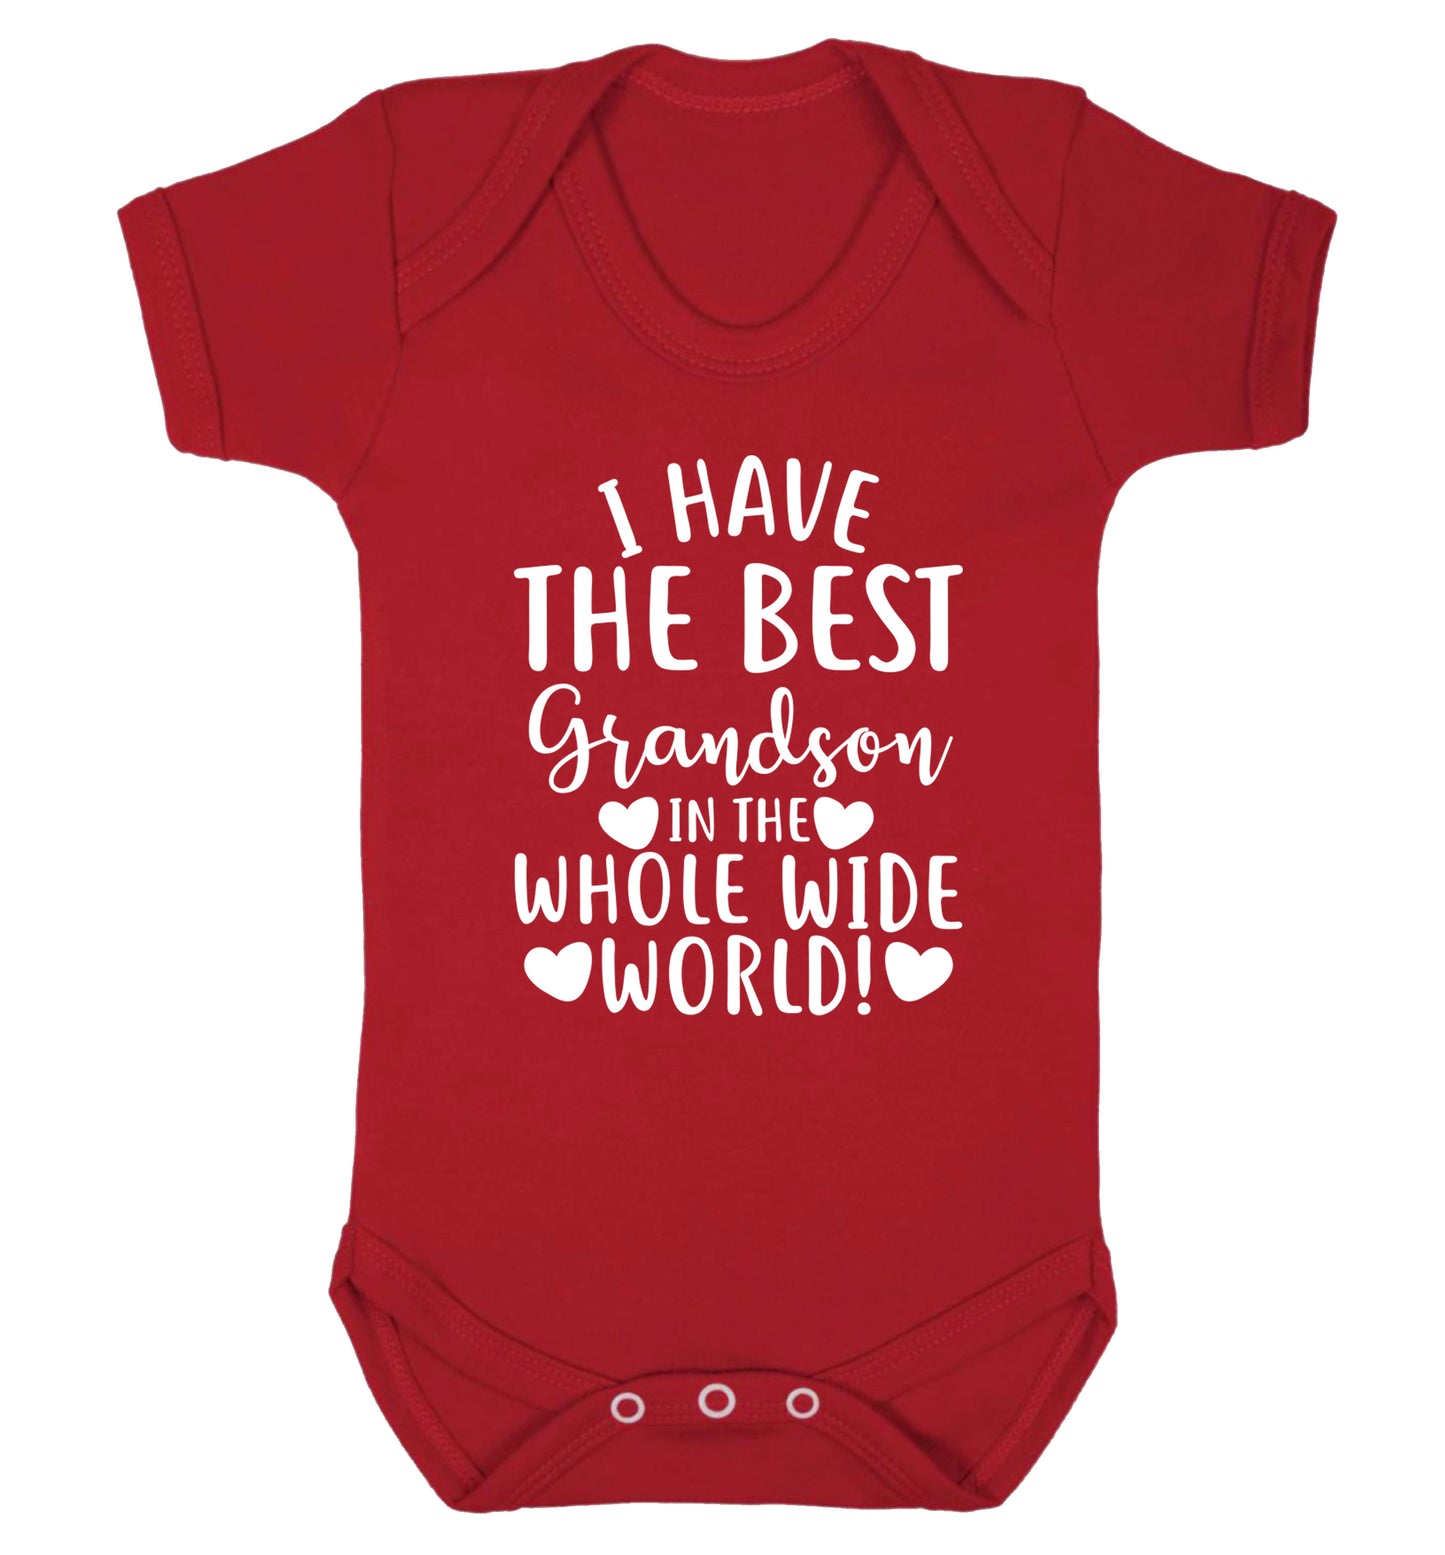 I have the best grandson in the whole wide world! Baby Vest red 18-24 months